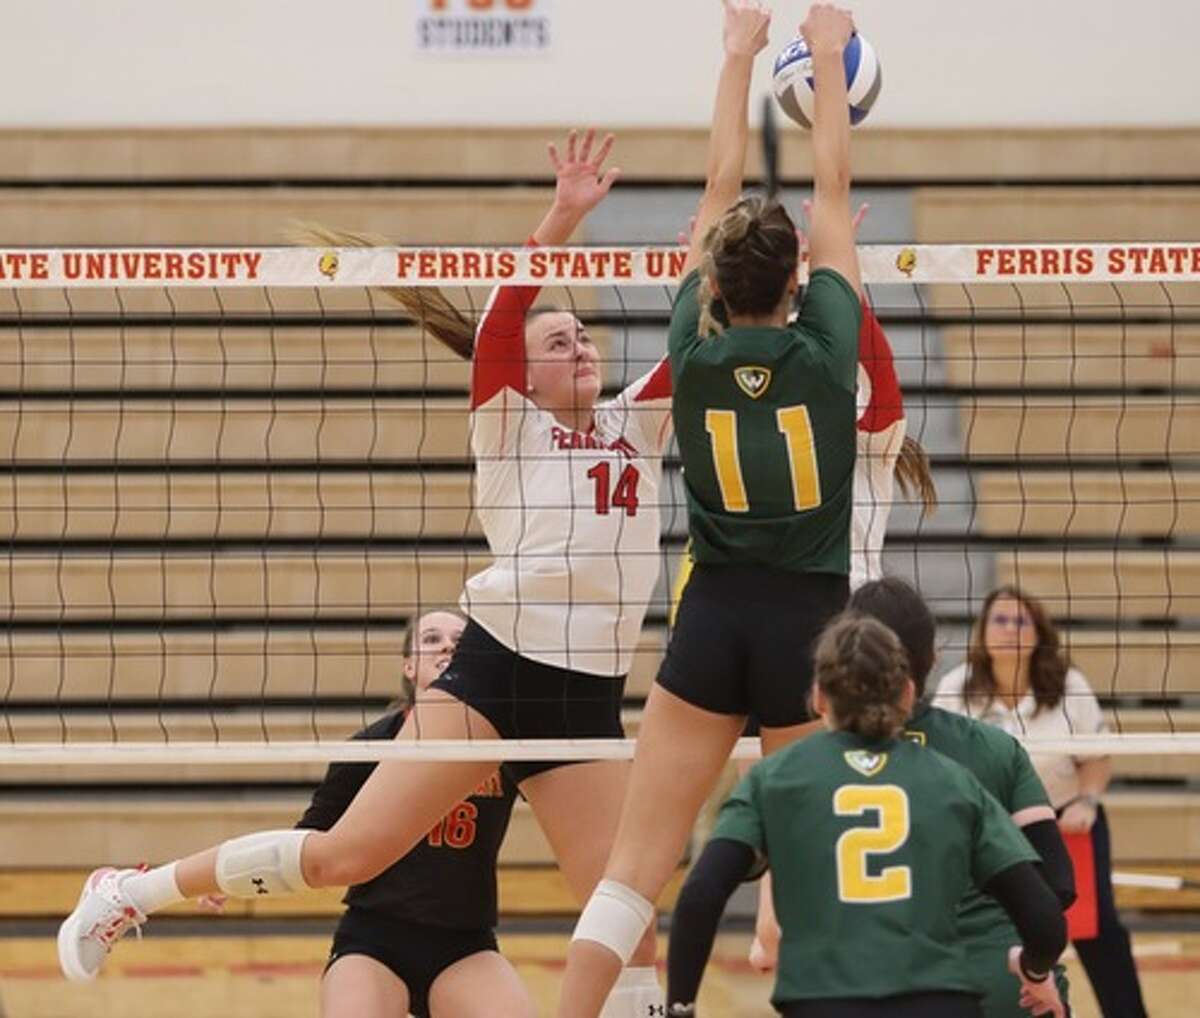 Ferris State has scheduled upcoming volleyball clinics for youngsters.